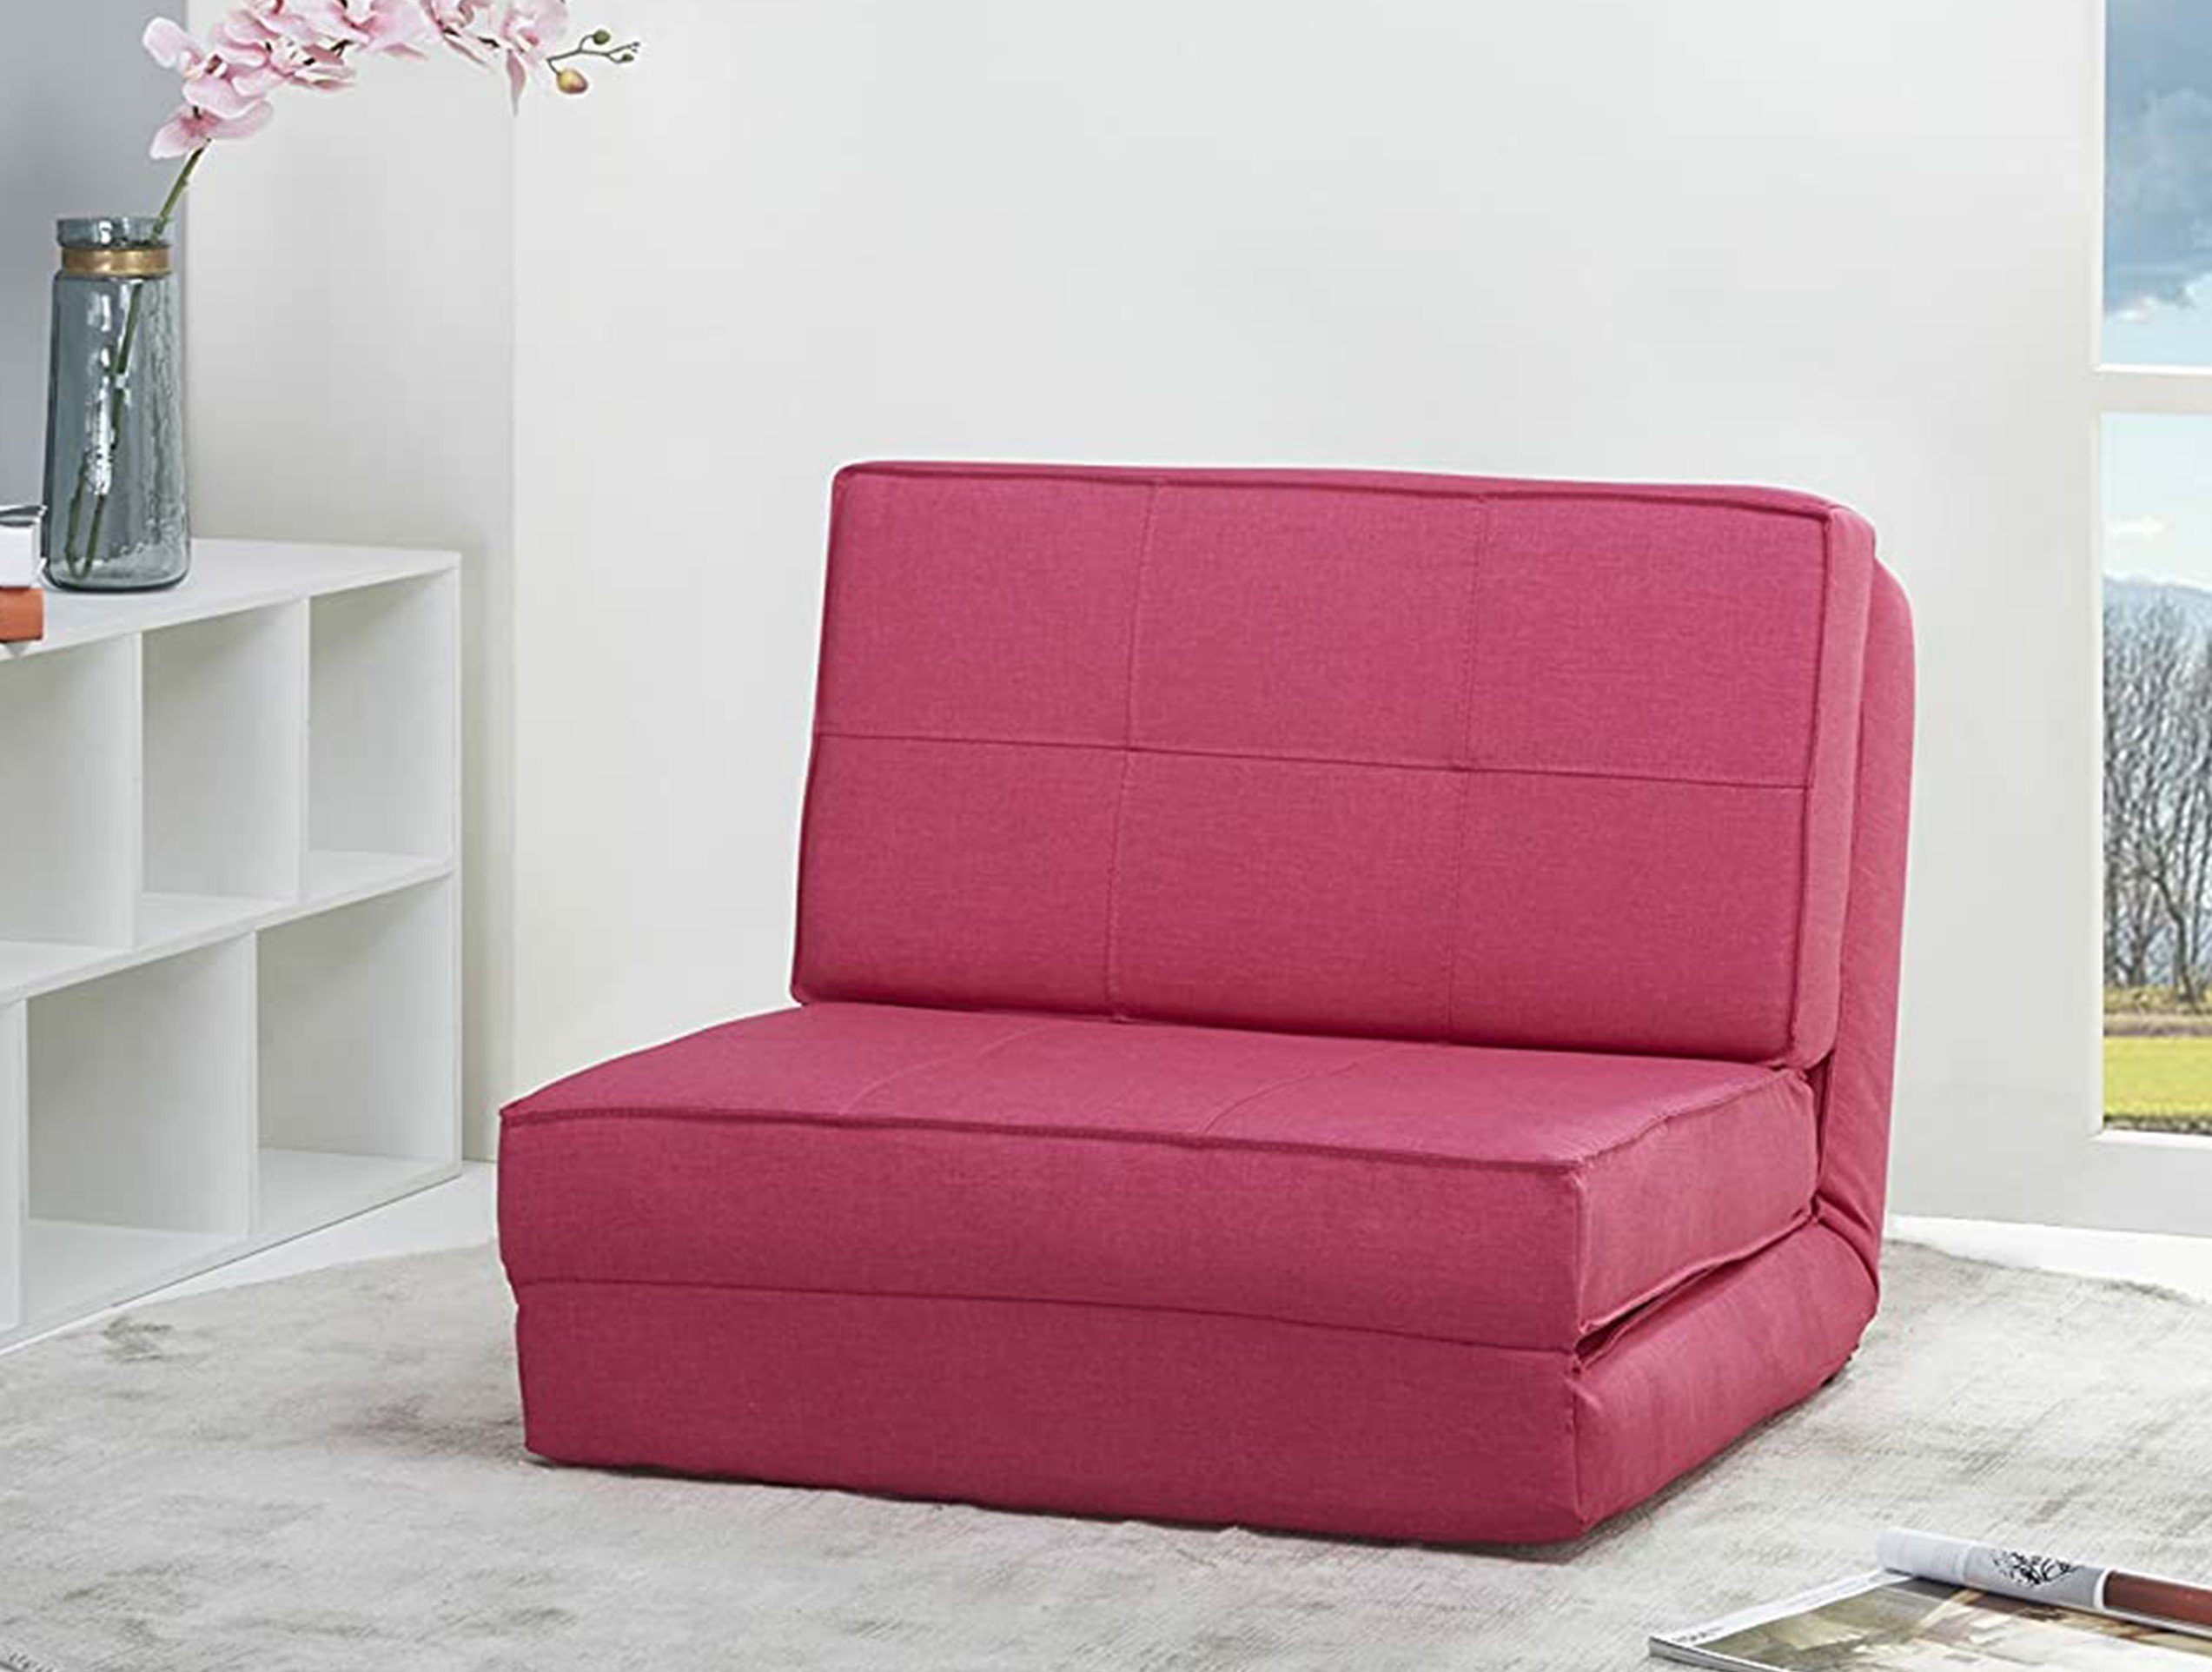 sesselseller 24 Relaxsessel Schlafsessel klein pink Stoff